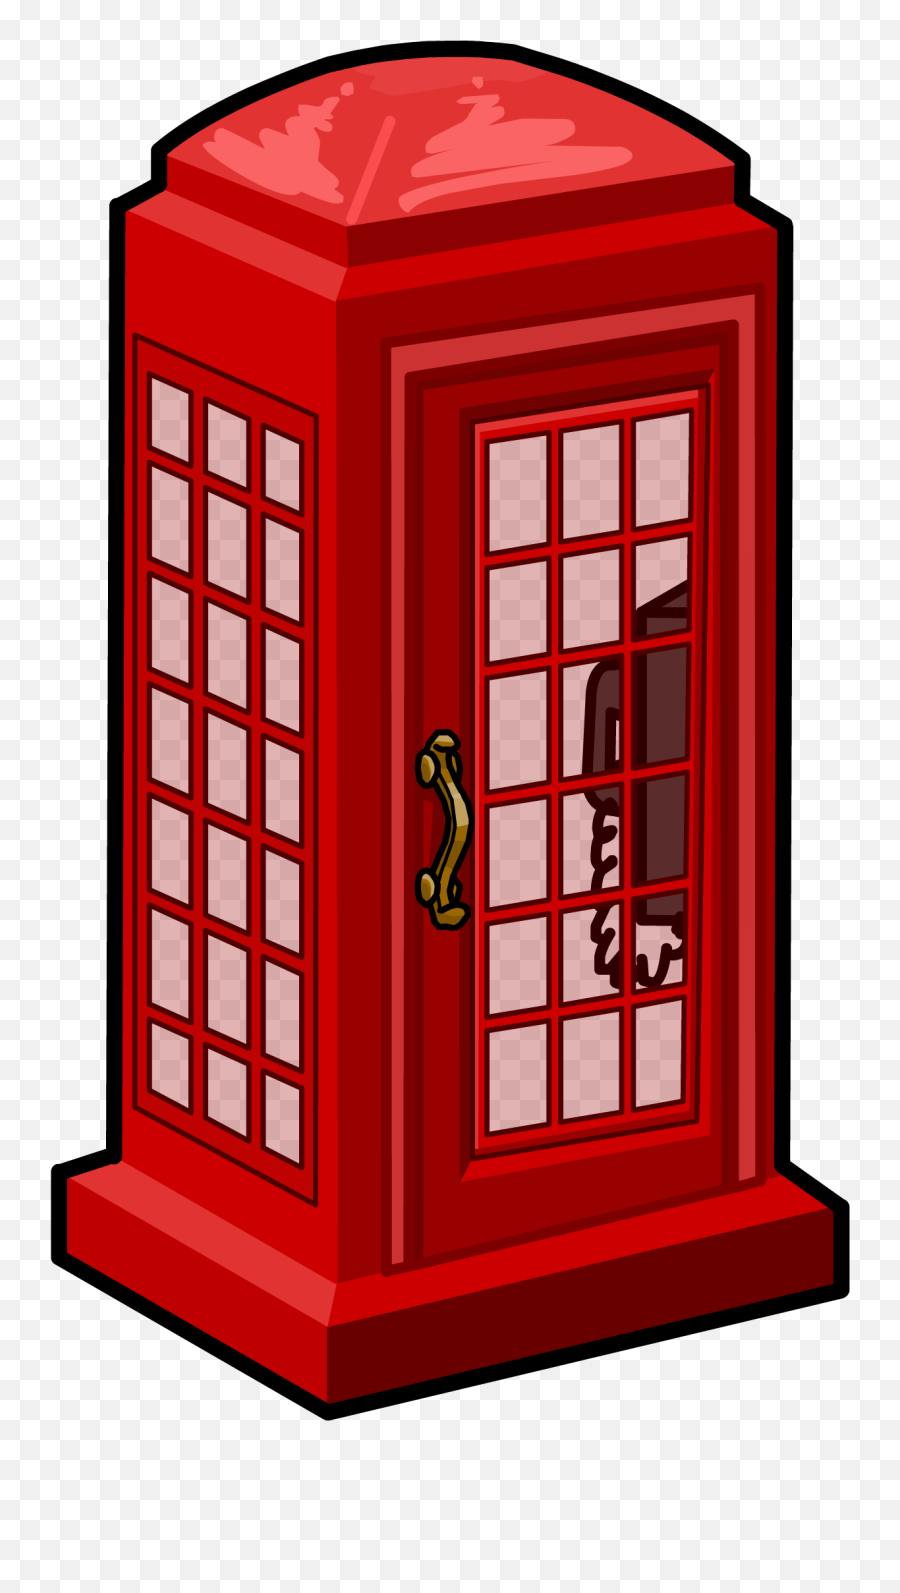 Phone Booth Png Image - Telephone Booth Clipart Emoji,Photo Booth Png